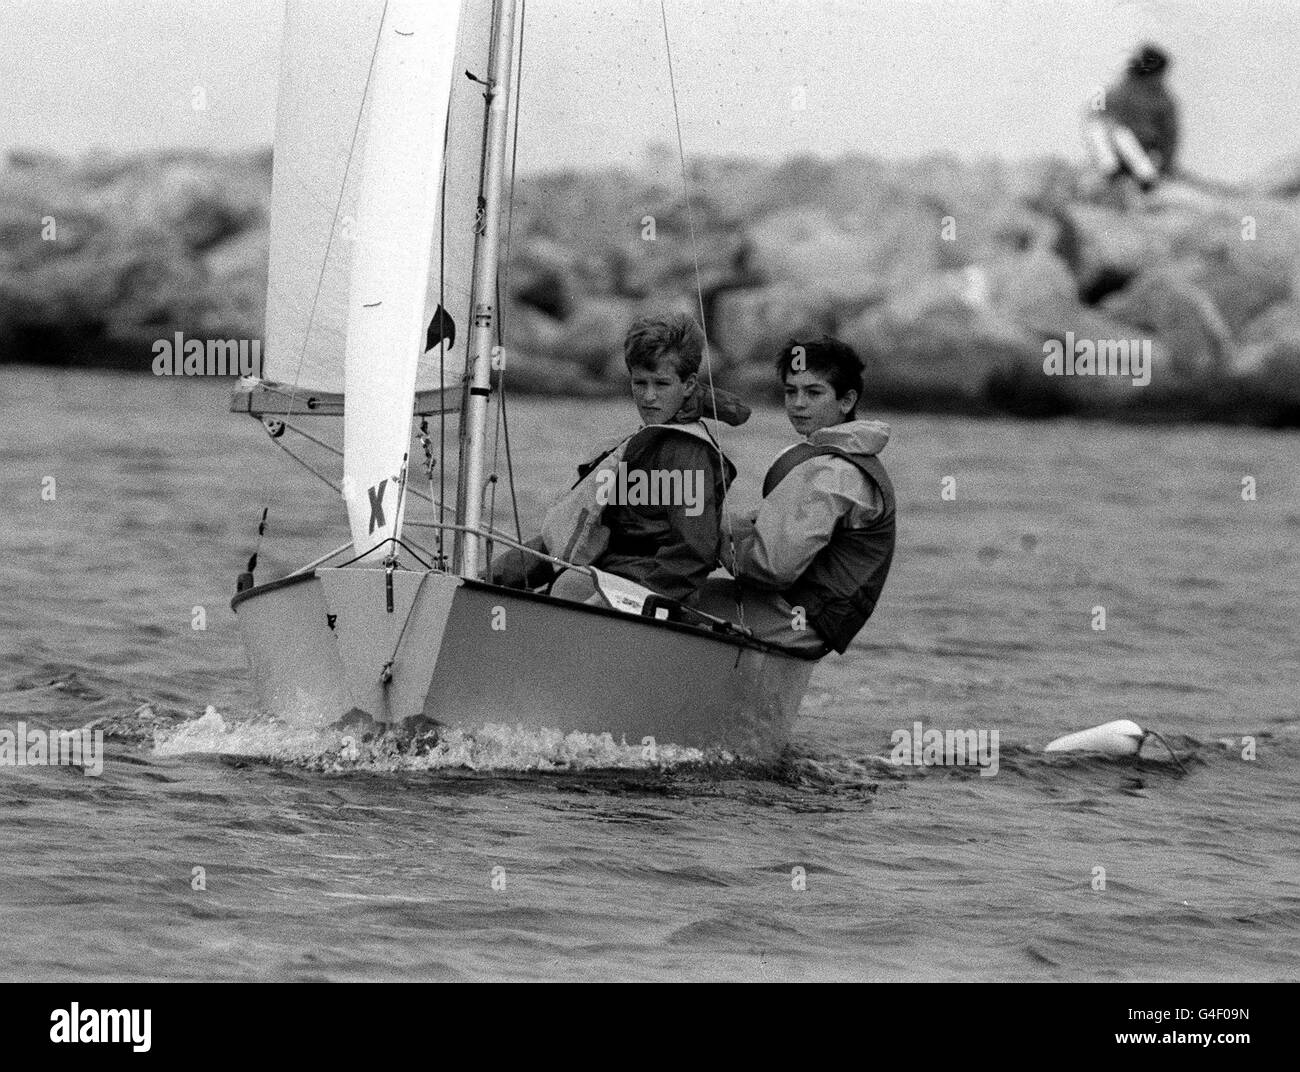 PA NEWS PHOTO 23/10/88 PETER PHILLIPS (LEFT) CREWING ON A DINGHY DURING A SAILING LESSON AT THE WEST KIRBY SAILING CLUB ON THE WIRRAL Stock Photo